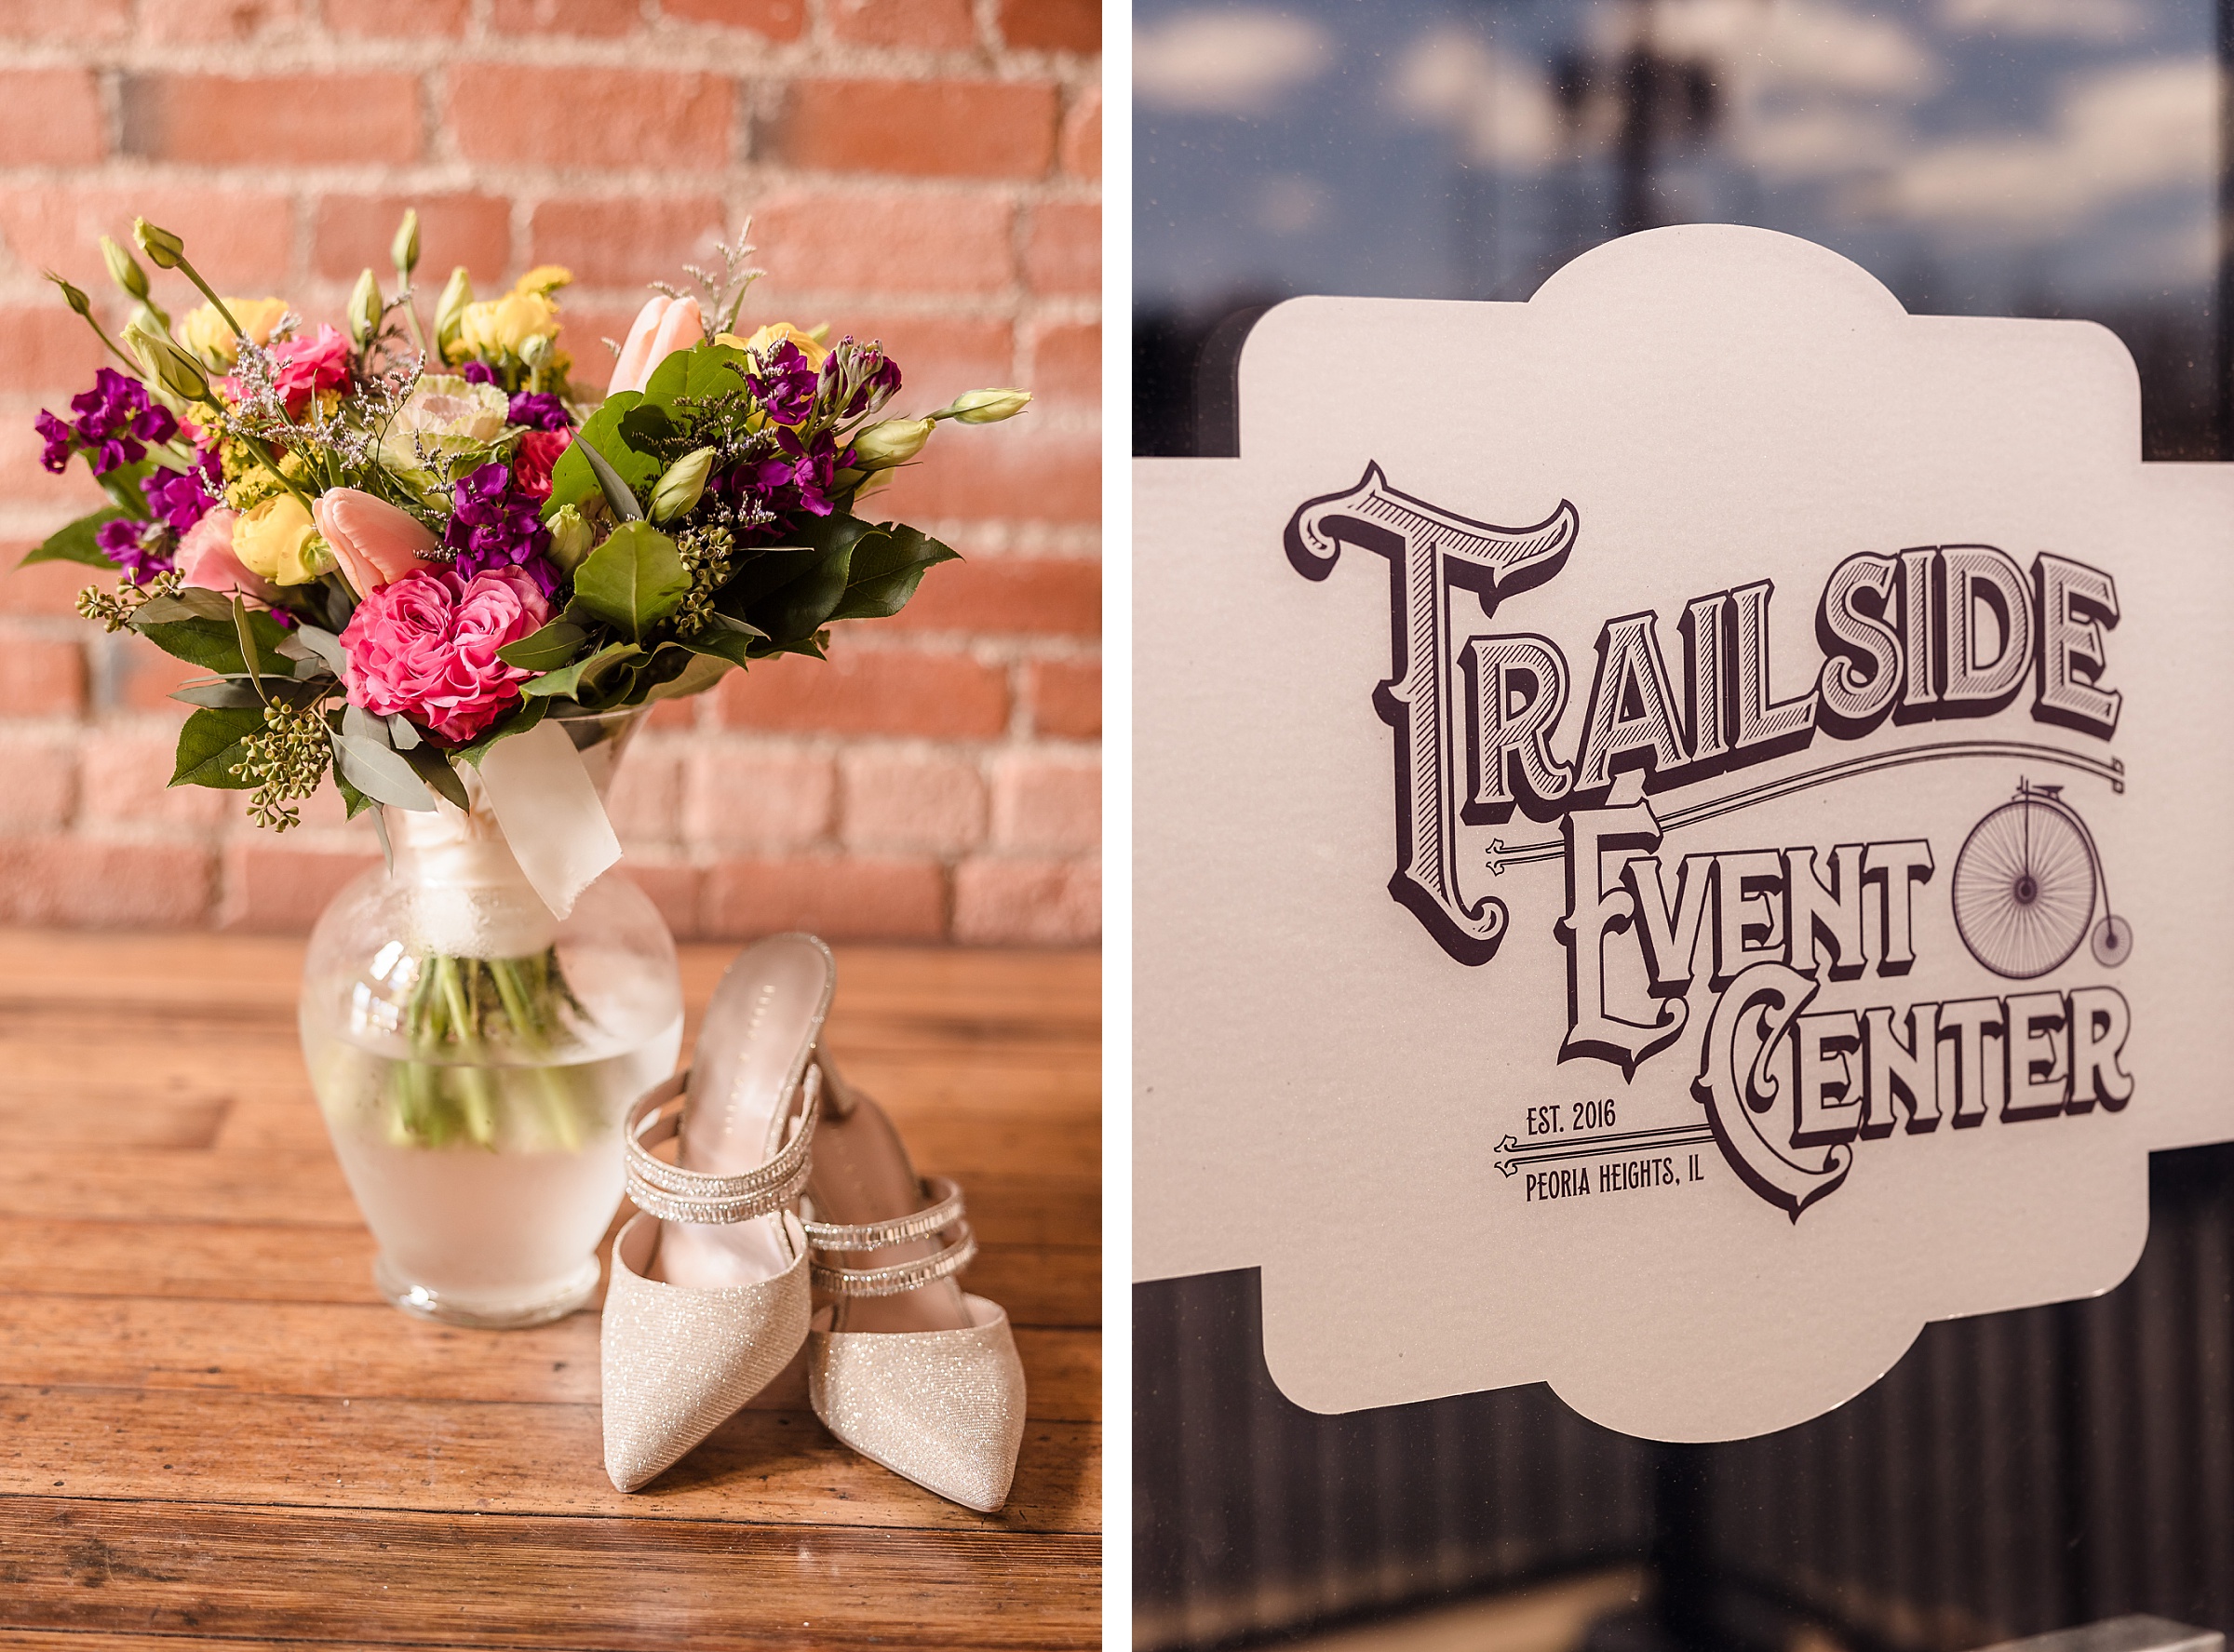 Wedding details at the Trailside Event Center in Peoria Heights, Illinois.